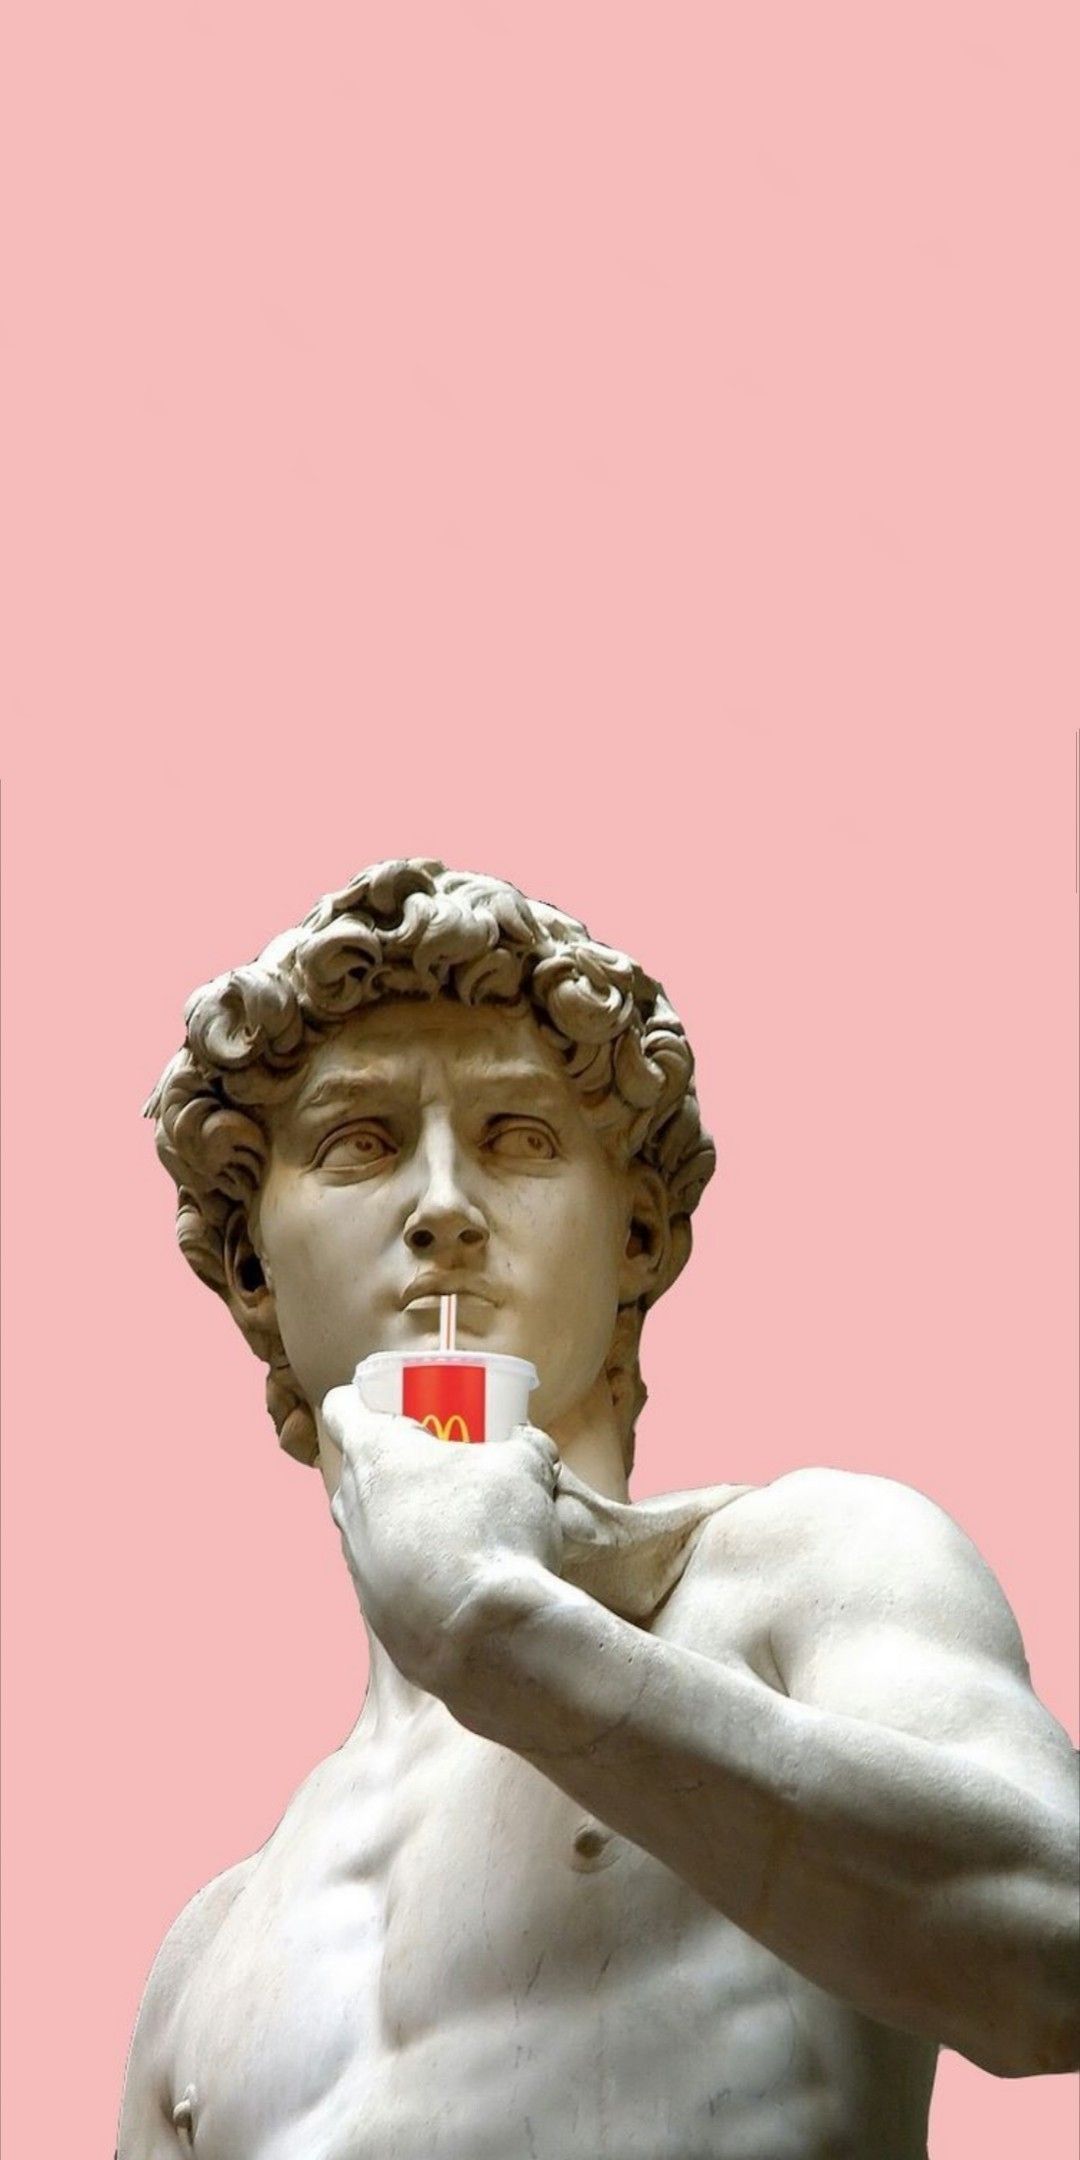 IPhone wallpaper of a statue holding a cup of McDonald's - Greek statue, statue